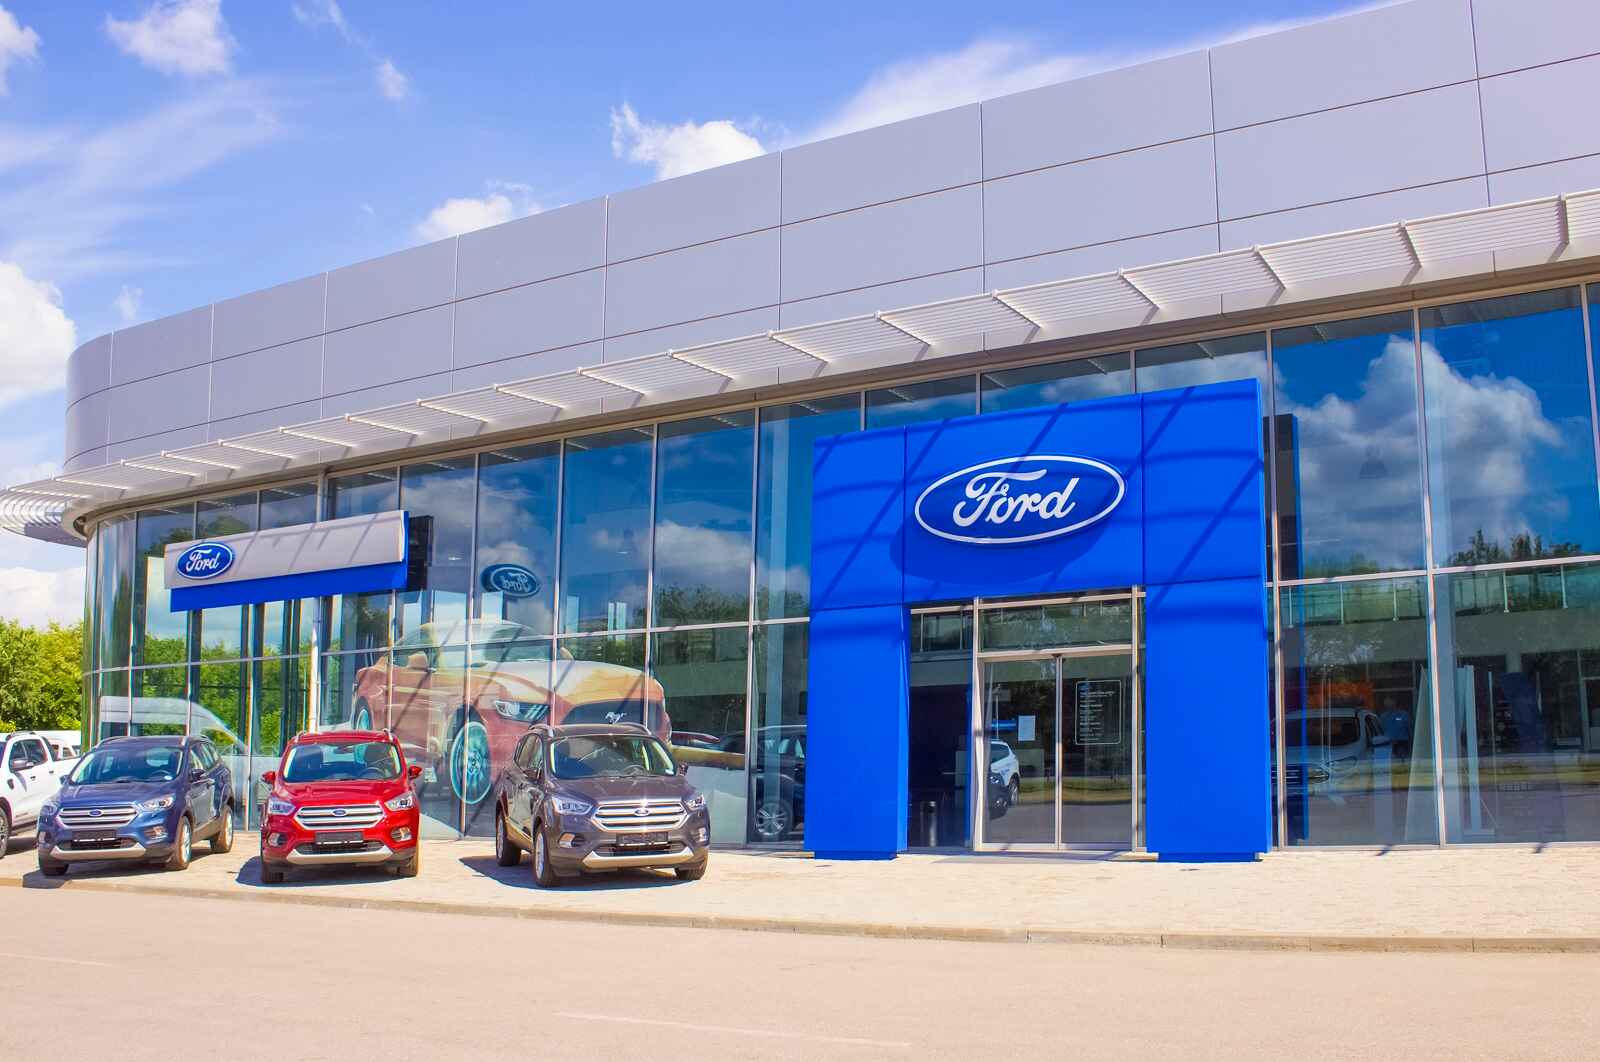 A Ford CPO certified pre owned car dealership exterior is shown